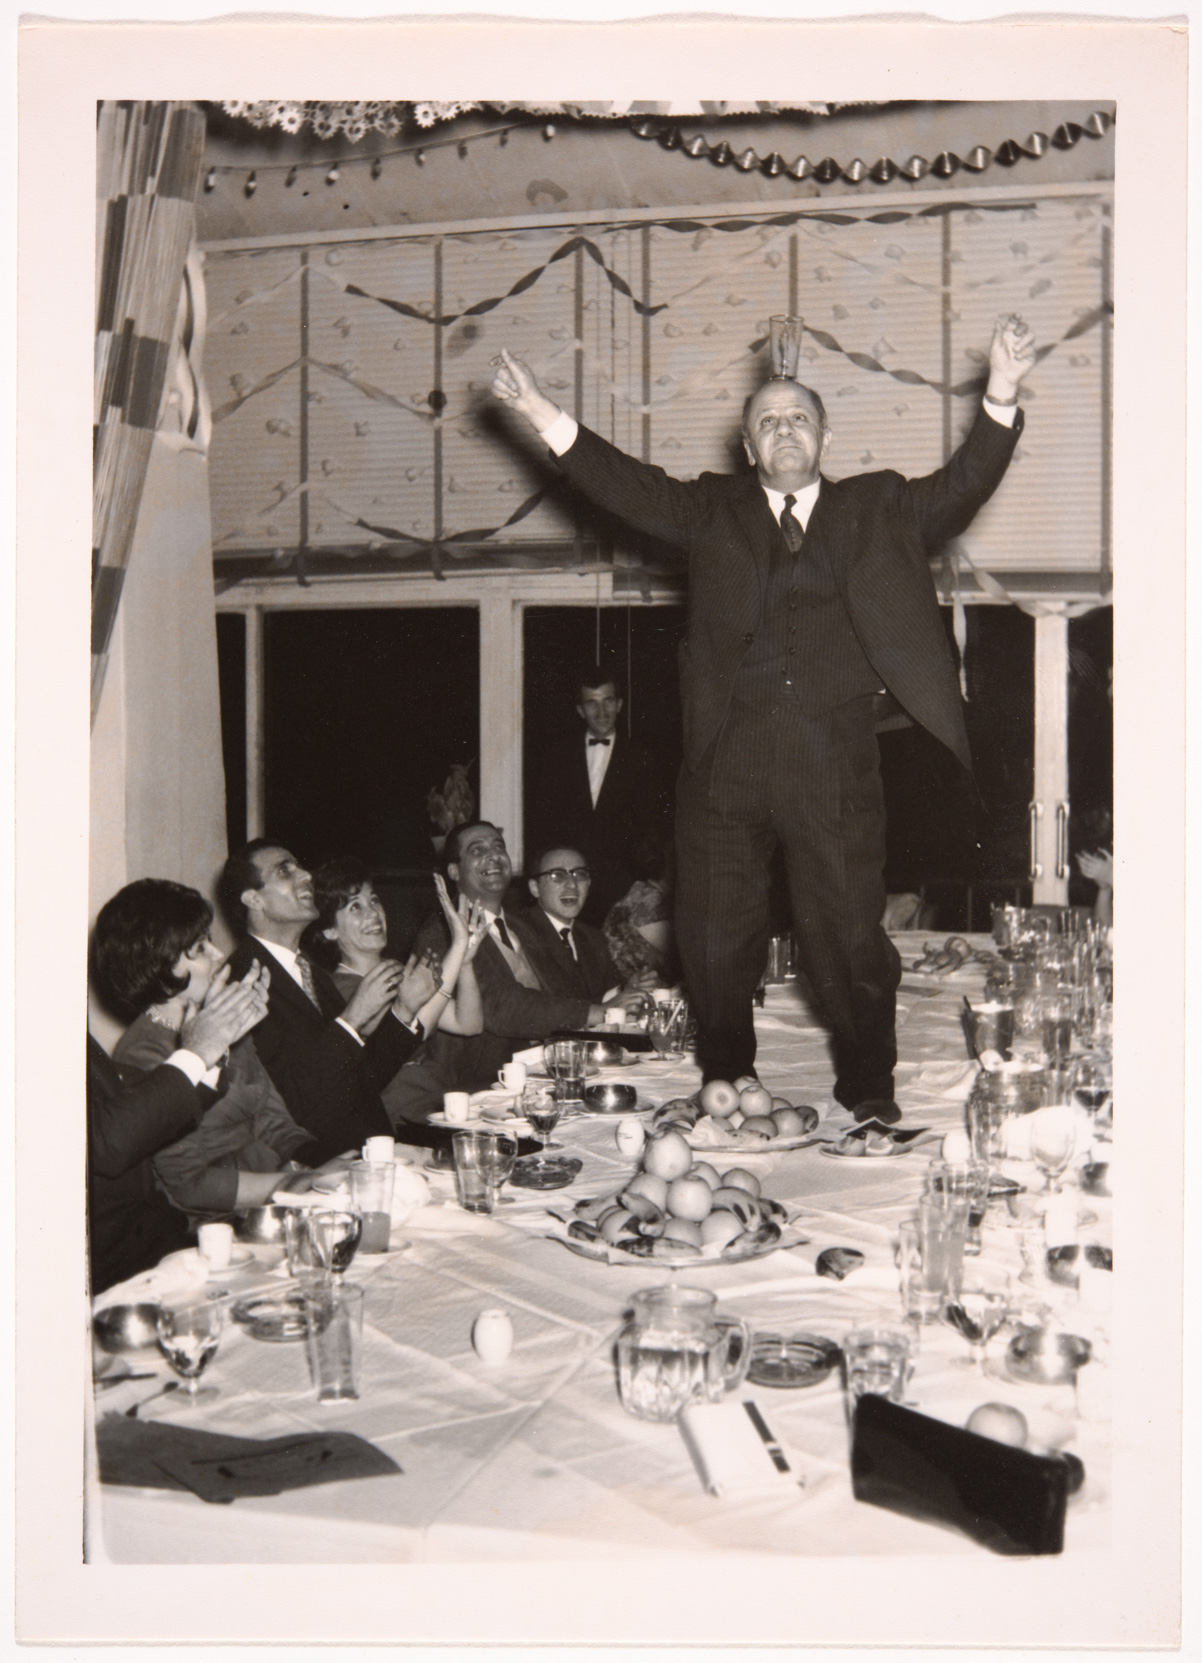 A man standing on a table receiving applause from diners